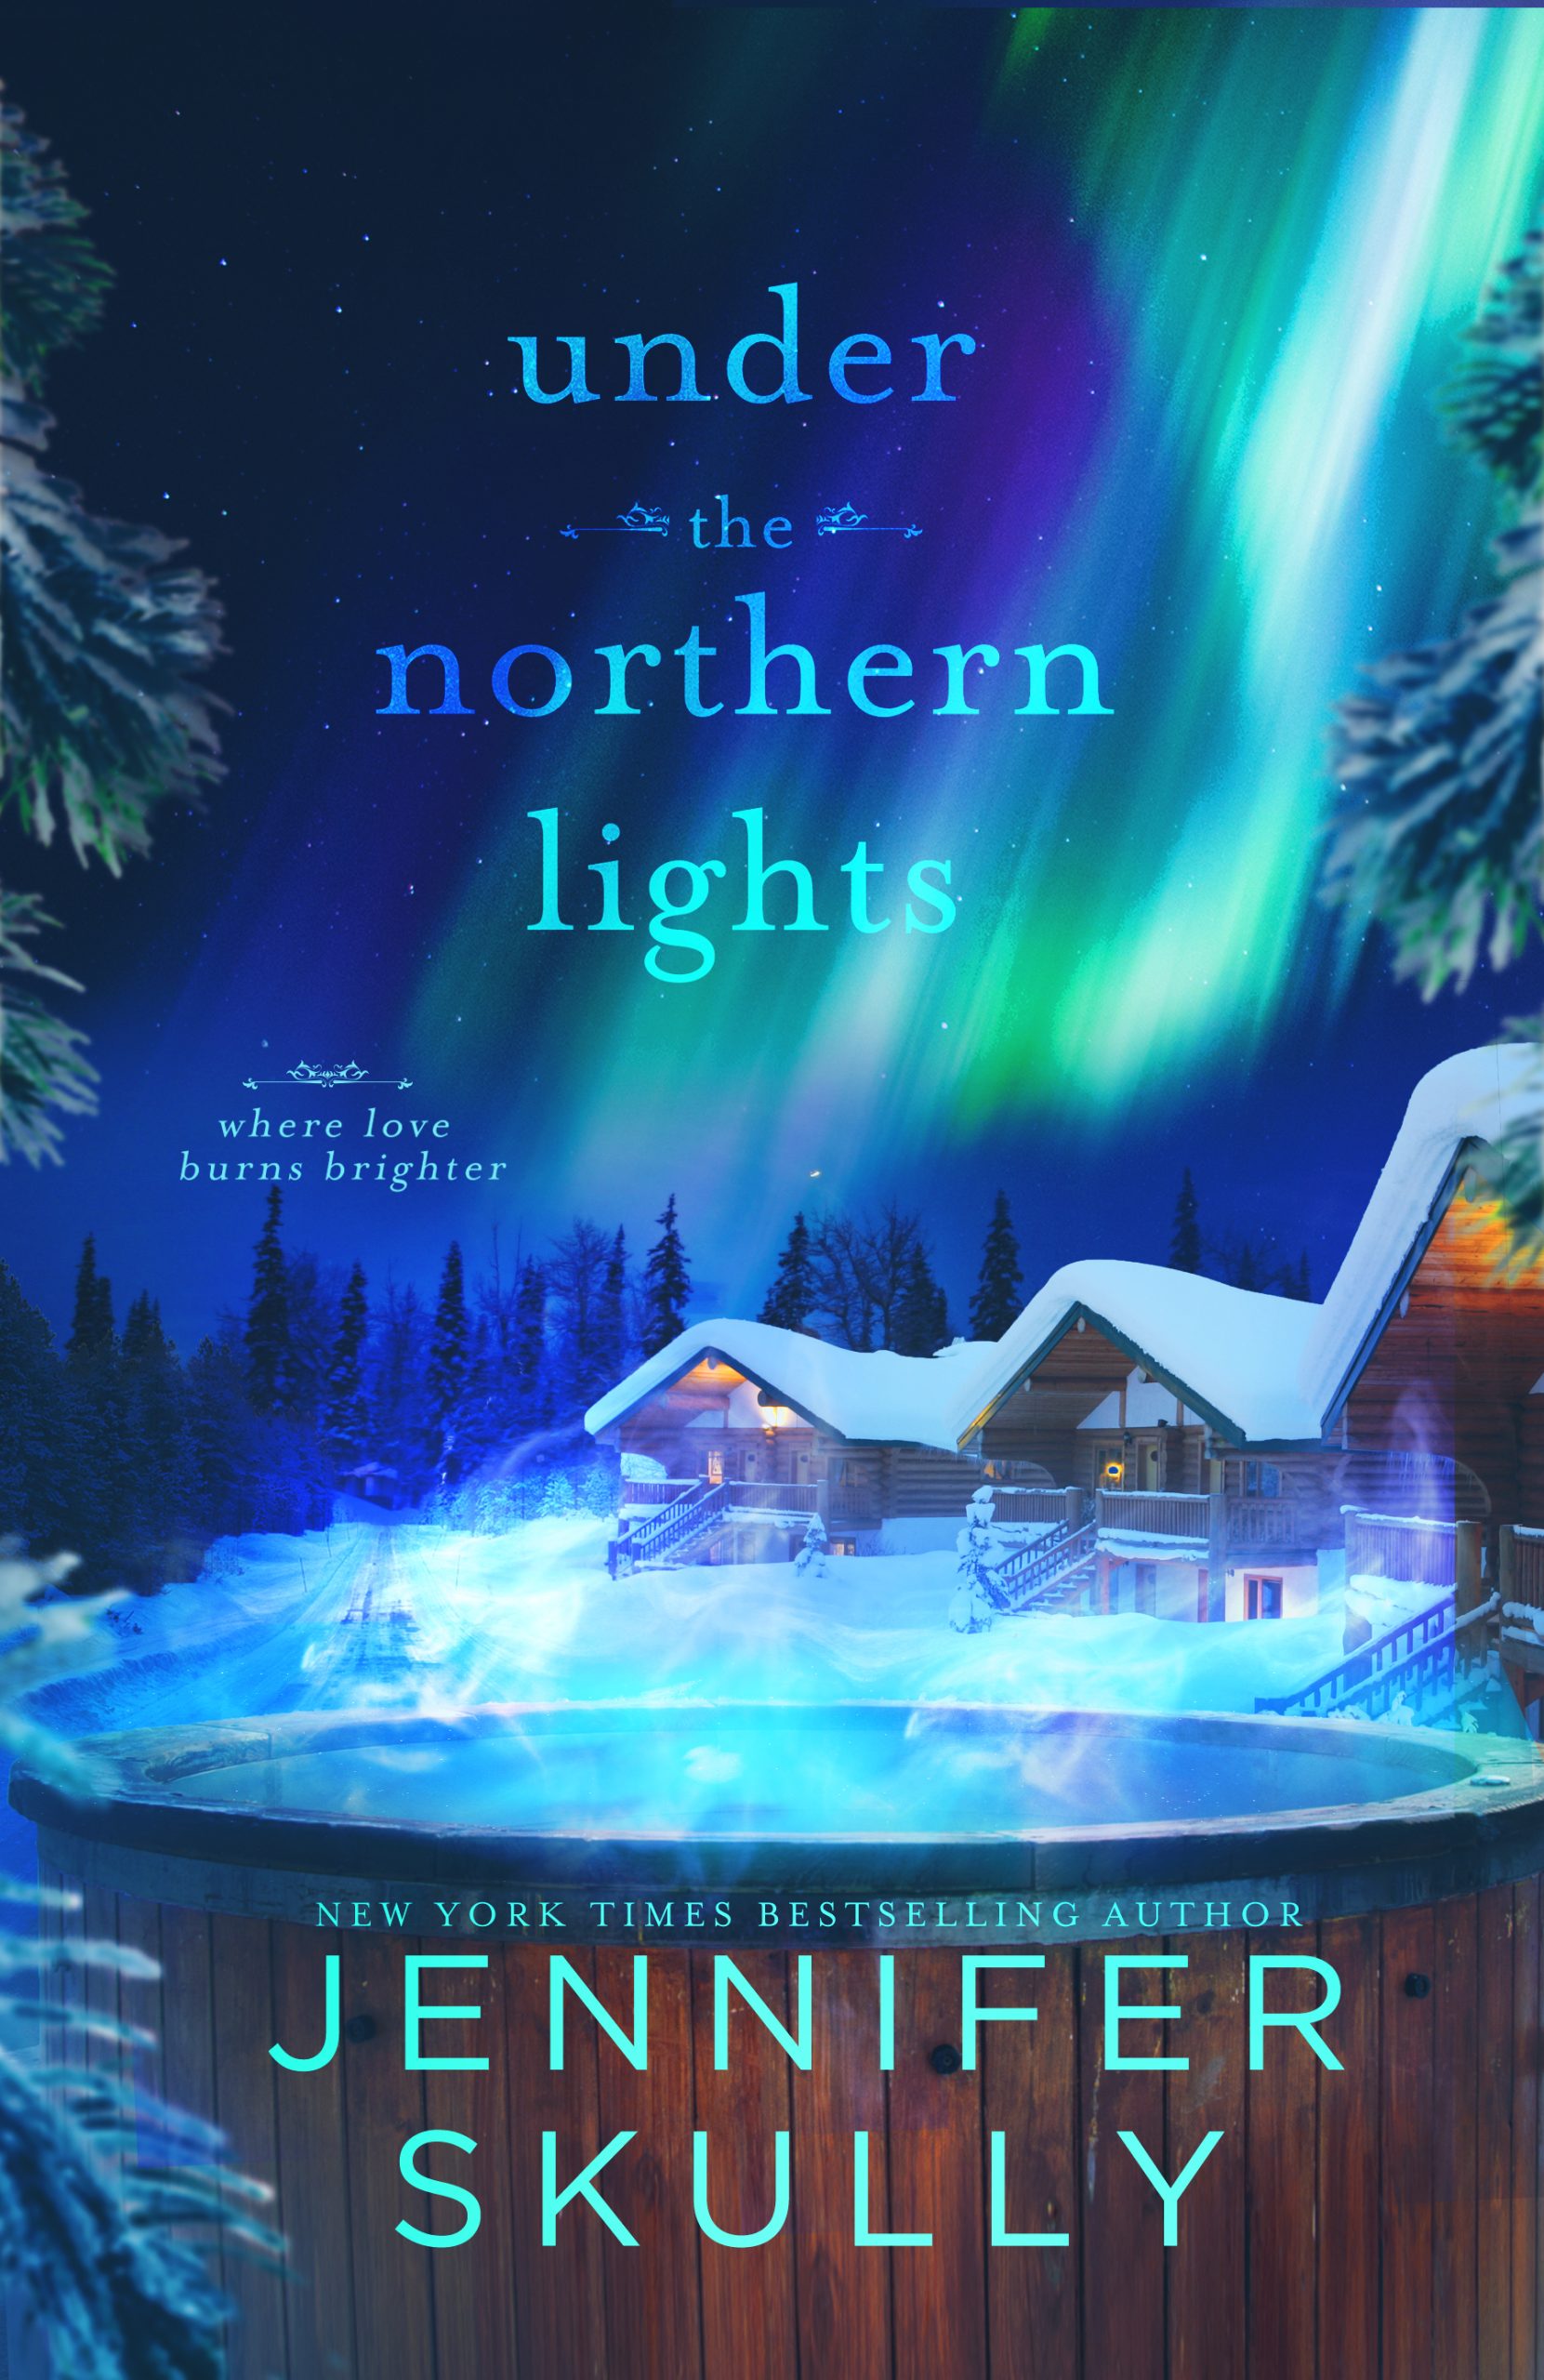 Under the Northern Lights (Once Again Book 4)